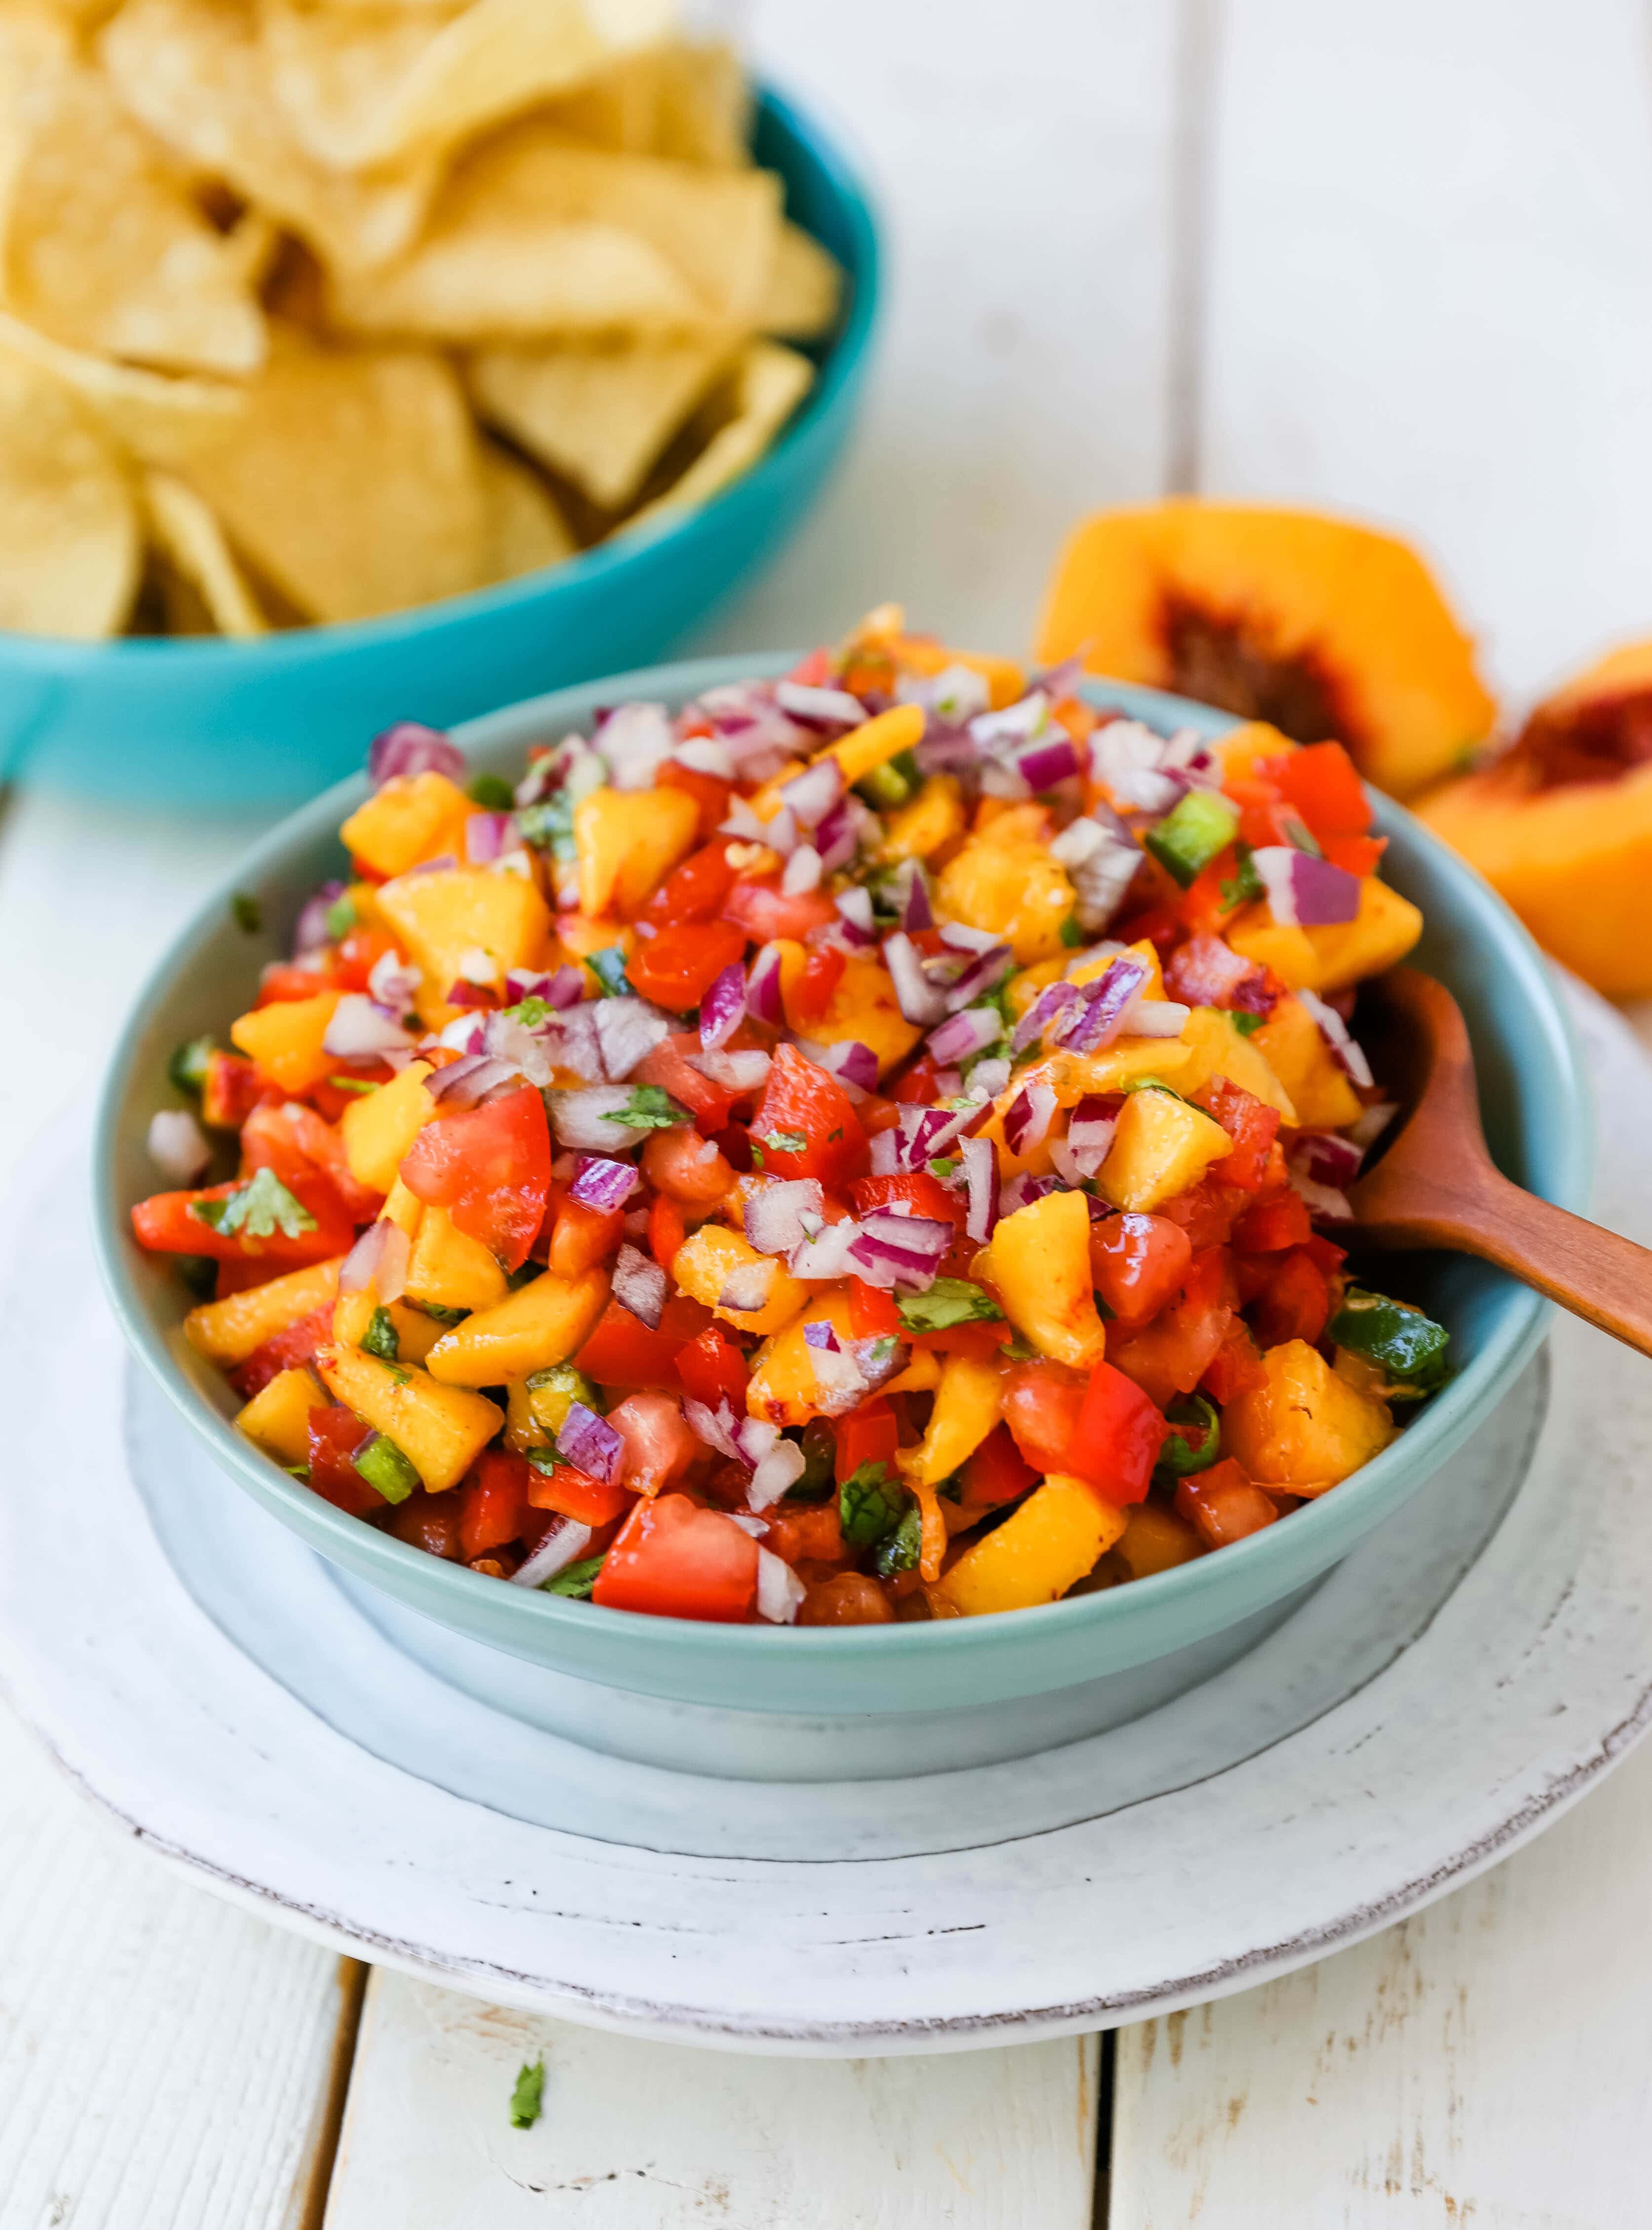 Peach Salsa. Fresh peach salsa with red pepper, jalapeño, red onion, tomatoes, cilantro, and fresh lime juice. A sweet and savory salsa perfect to pair with chips, grilled chicken or pork. www.modernhoney.com #peachsalsa #salsa #peachrecipes